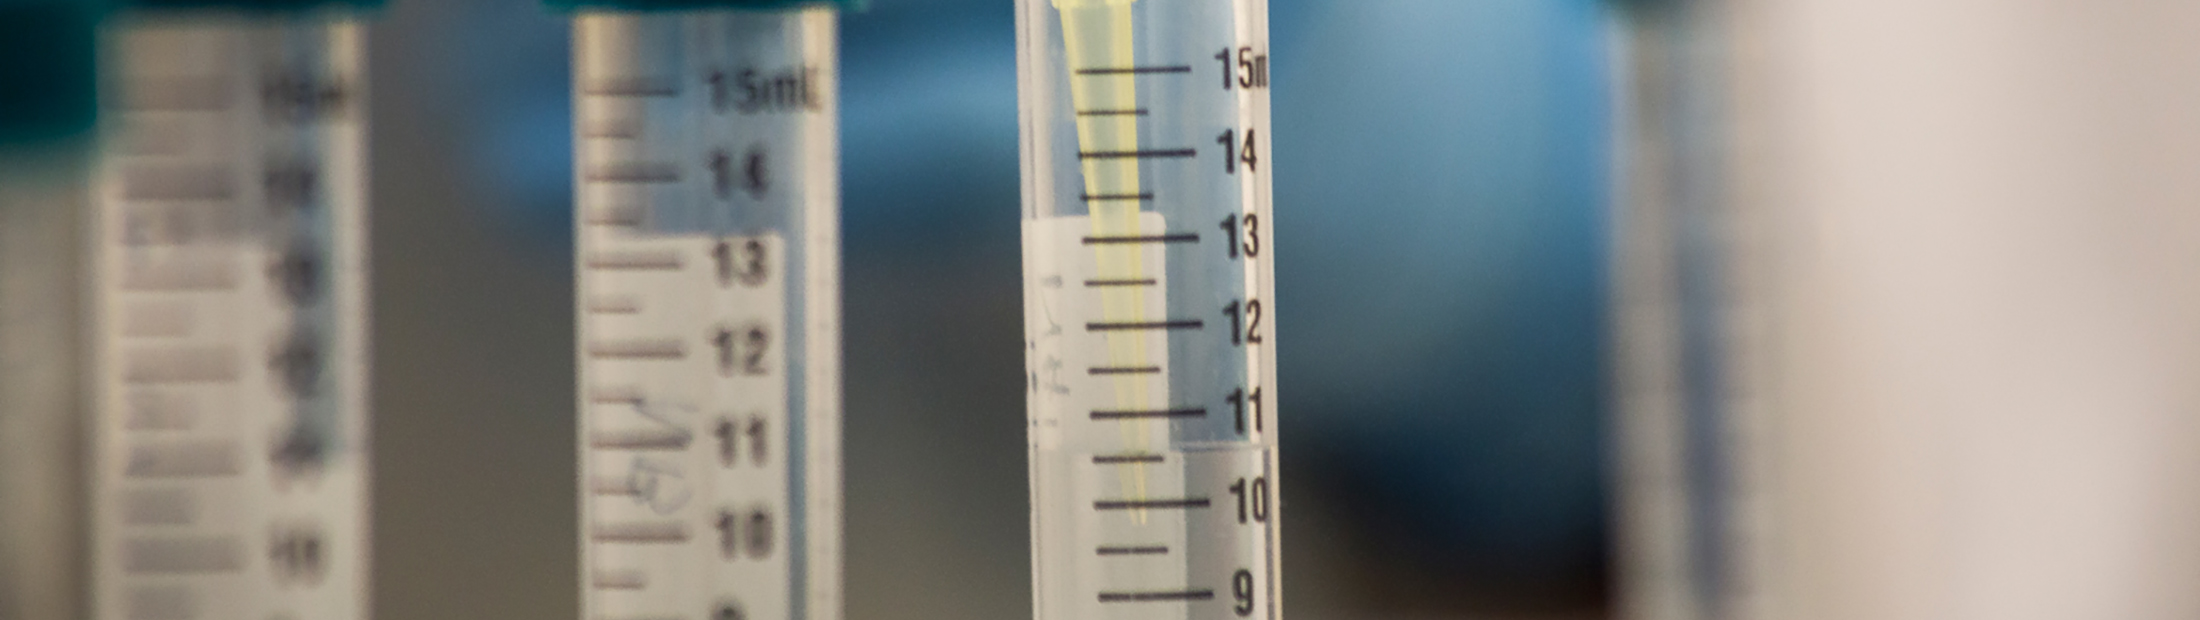 a close up image of a phd student measuring ammonia concentration levels